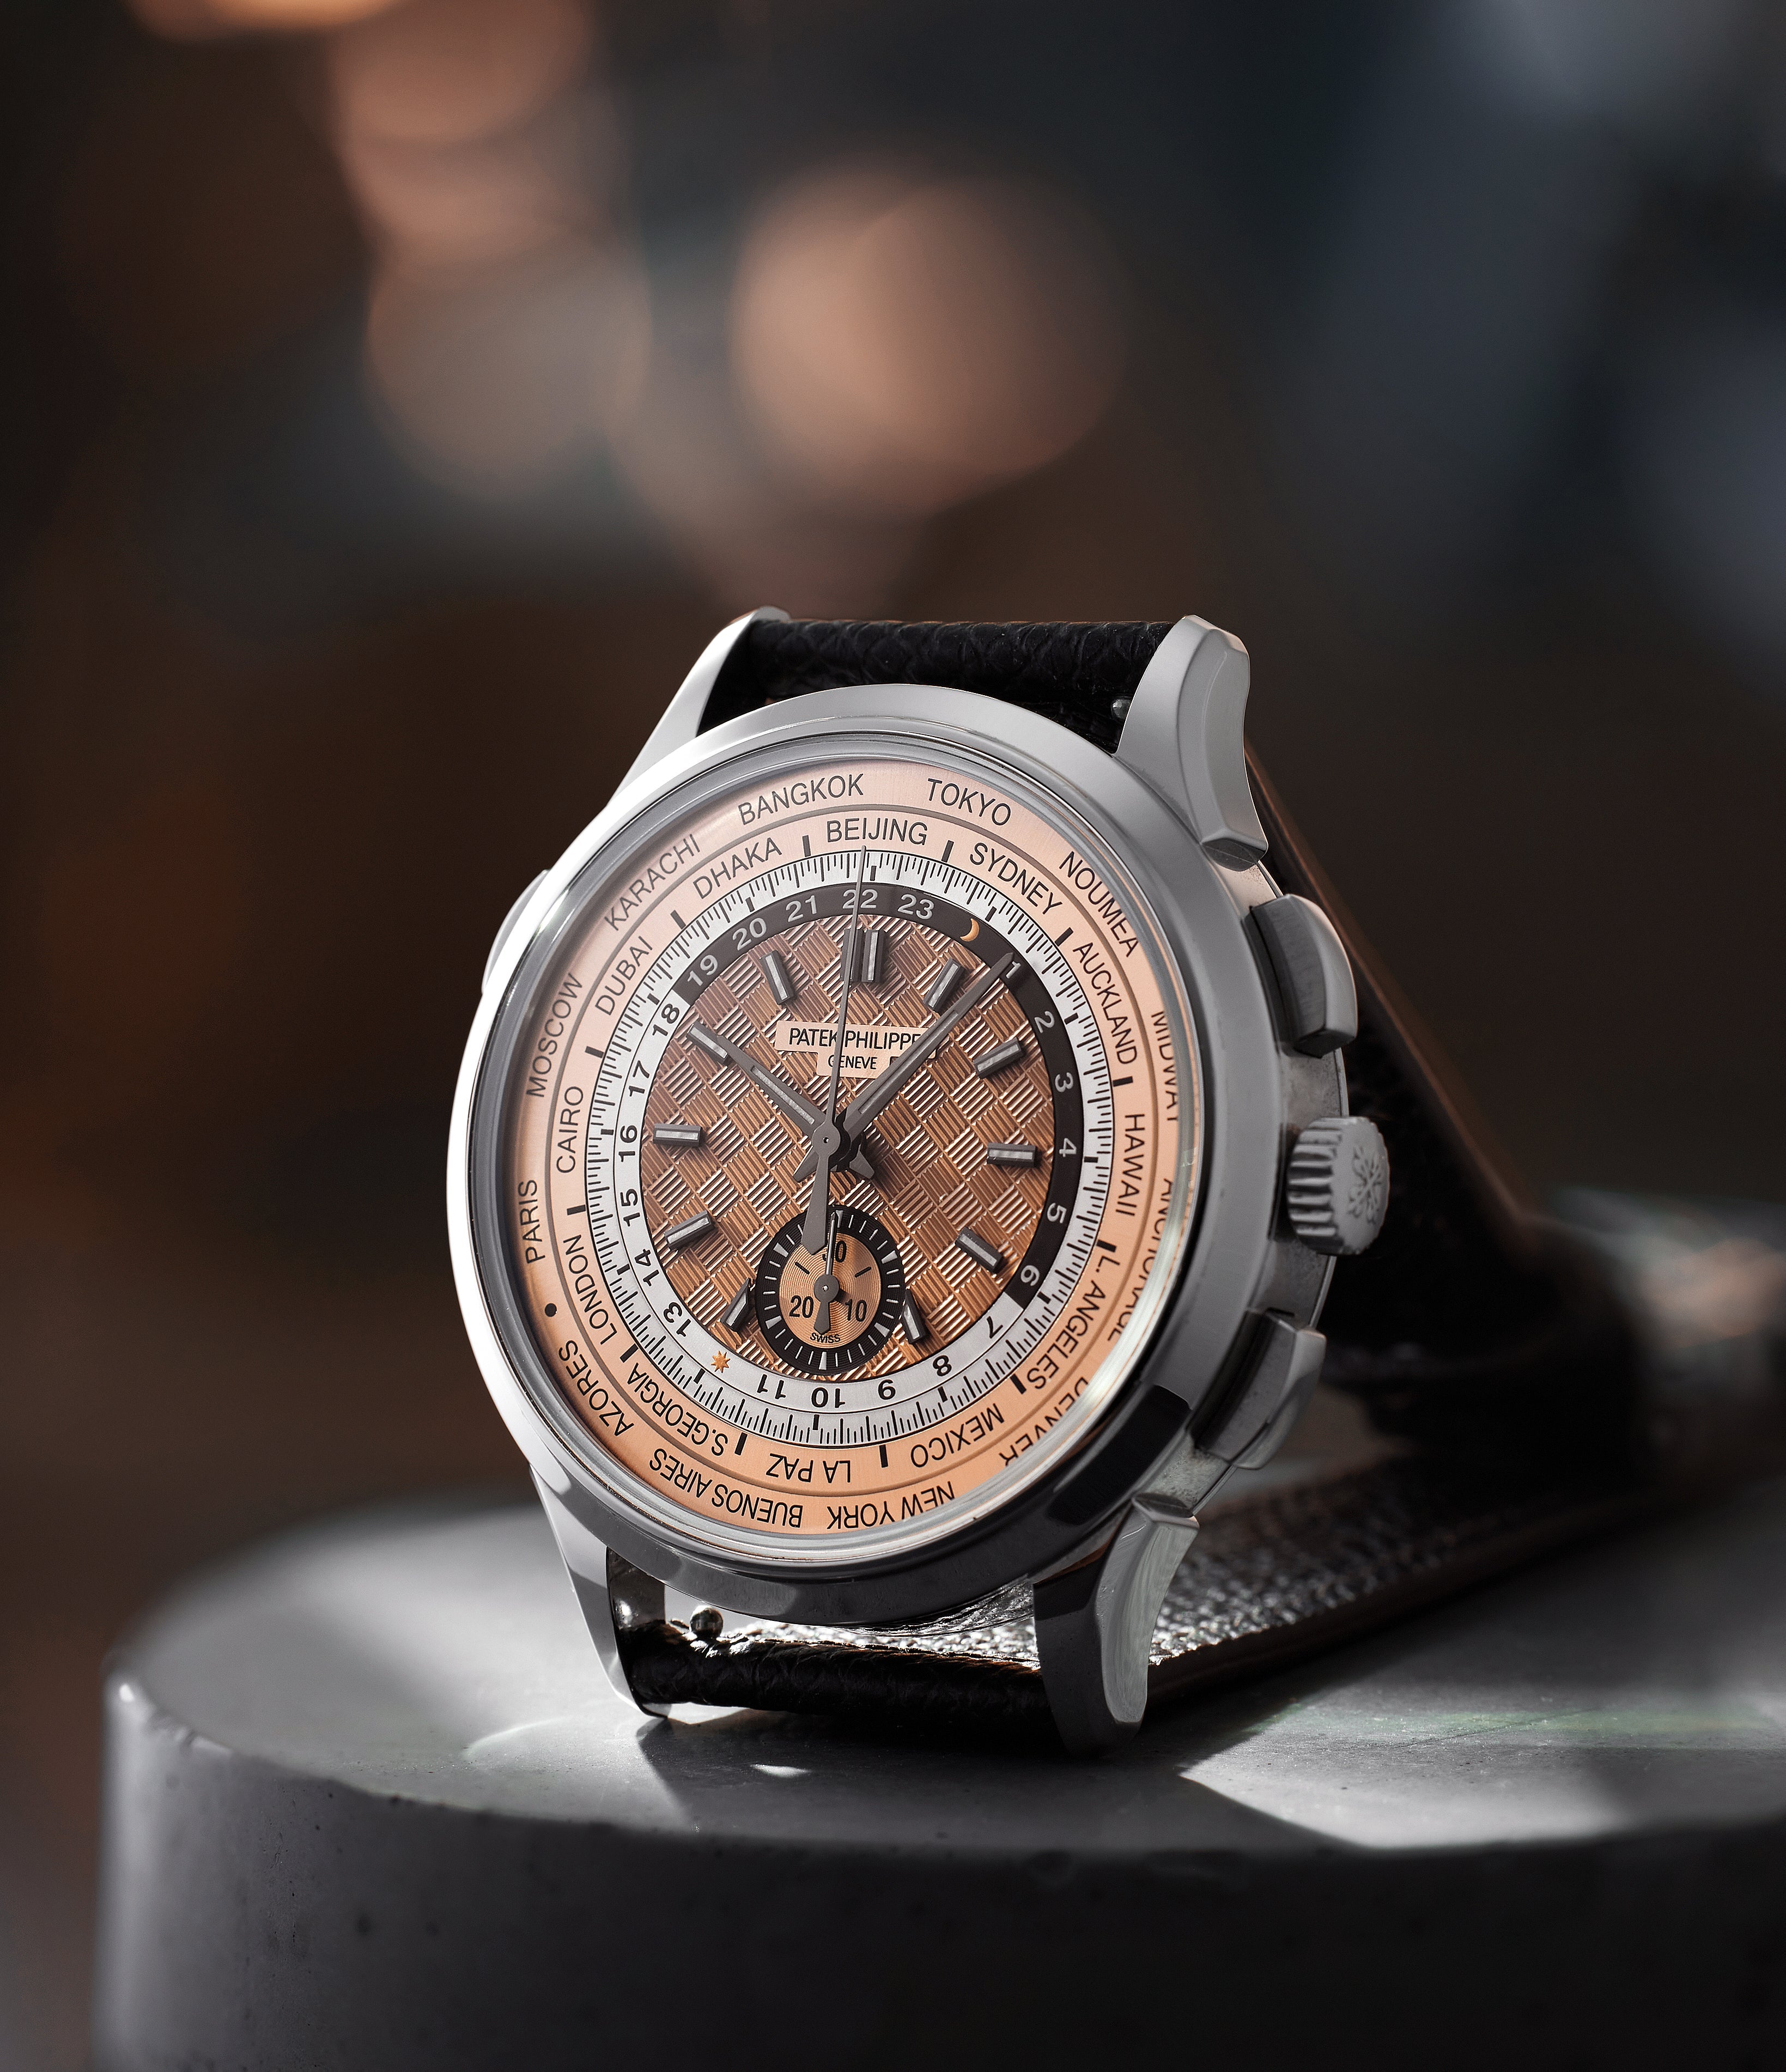 In depth Review: Patek Philippe 2523 Reference World Time.